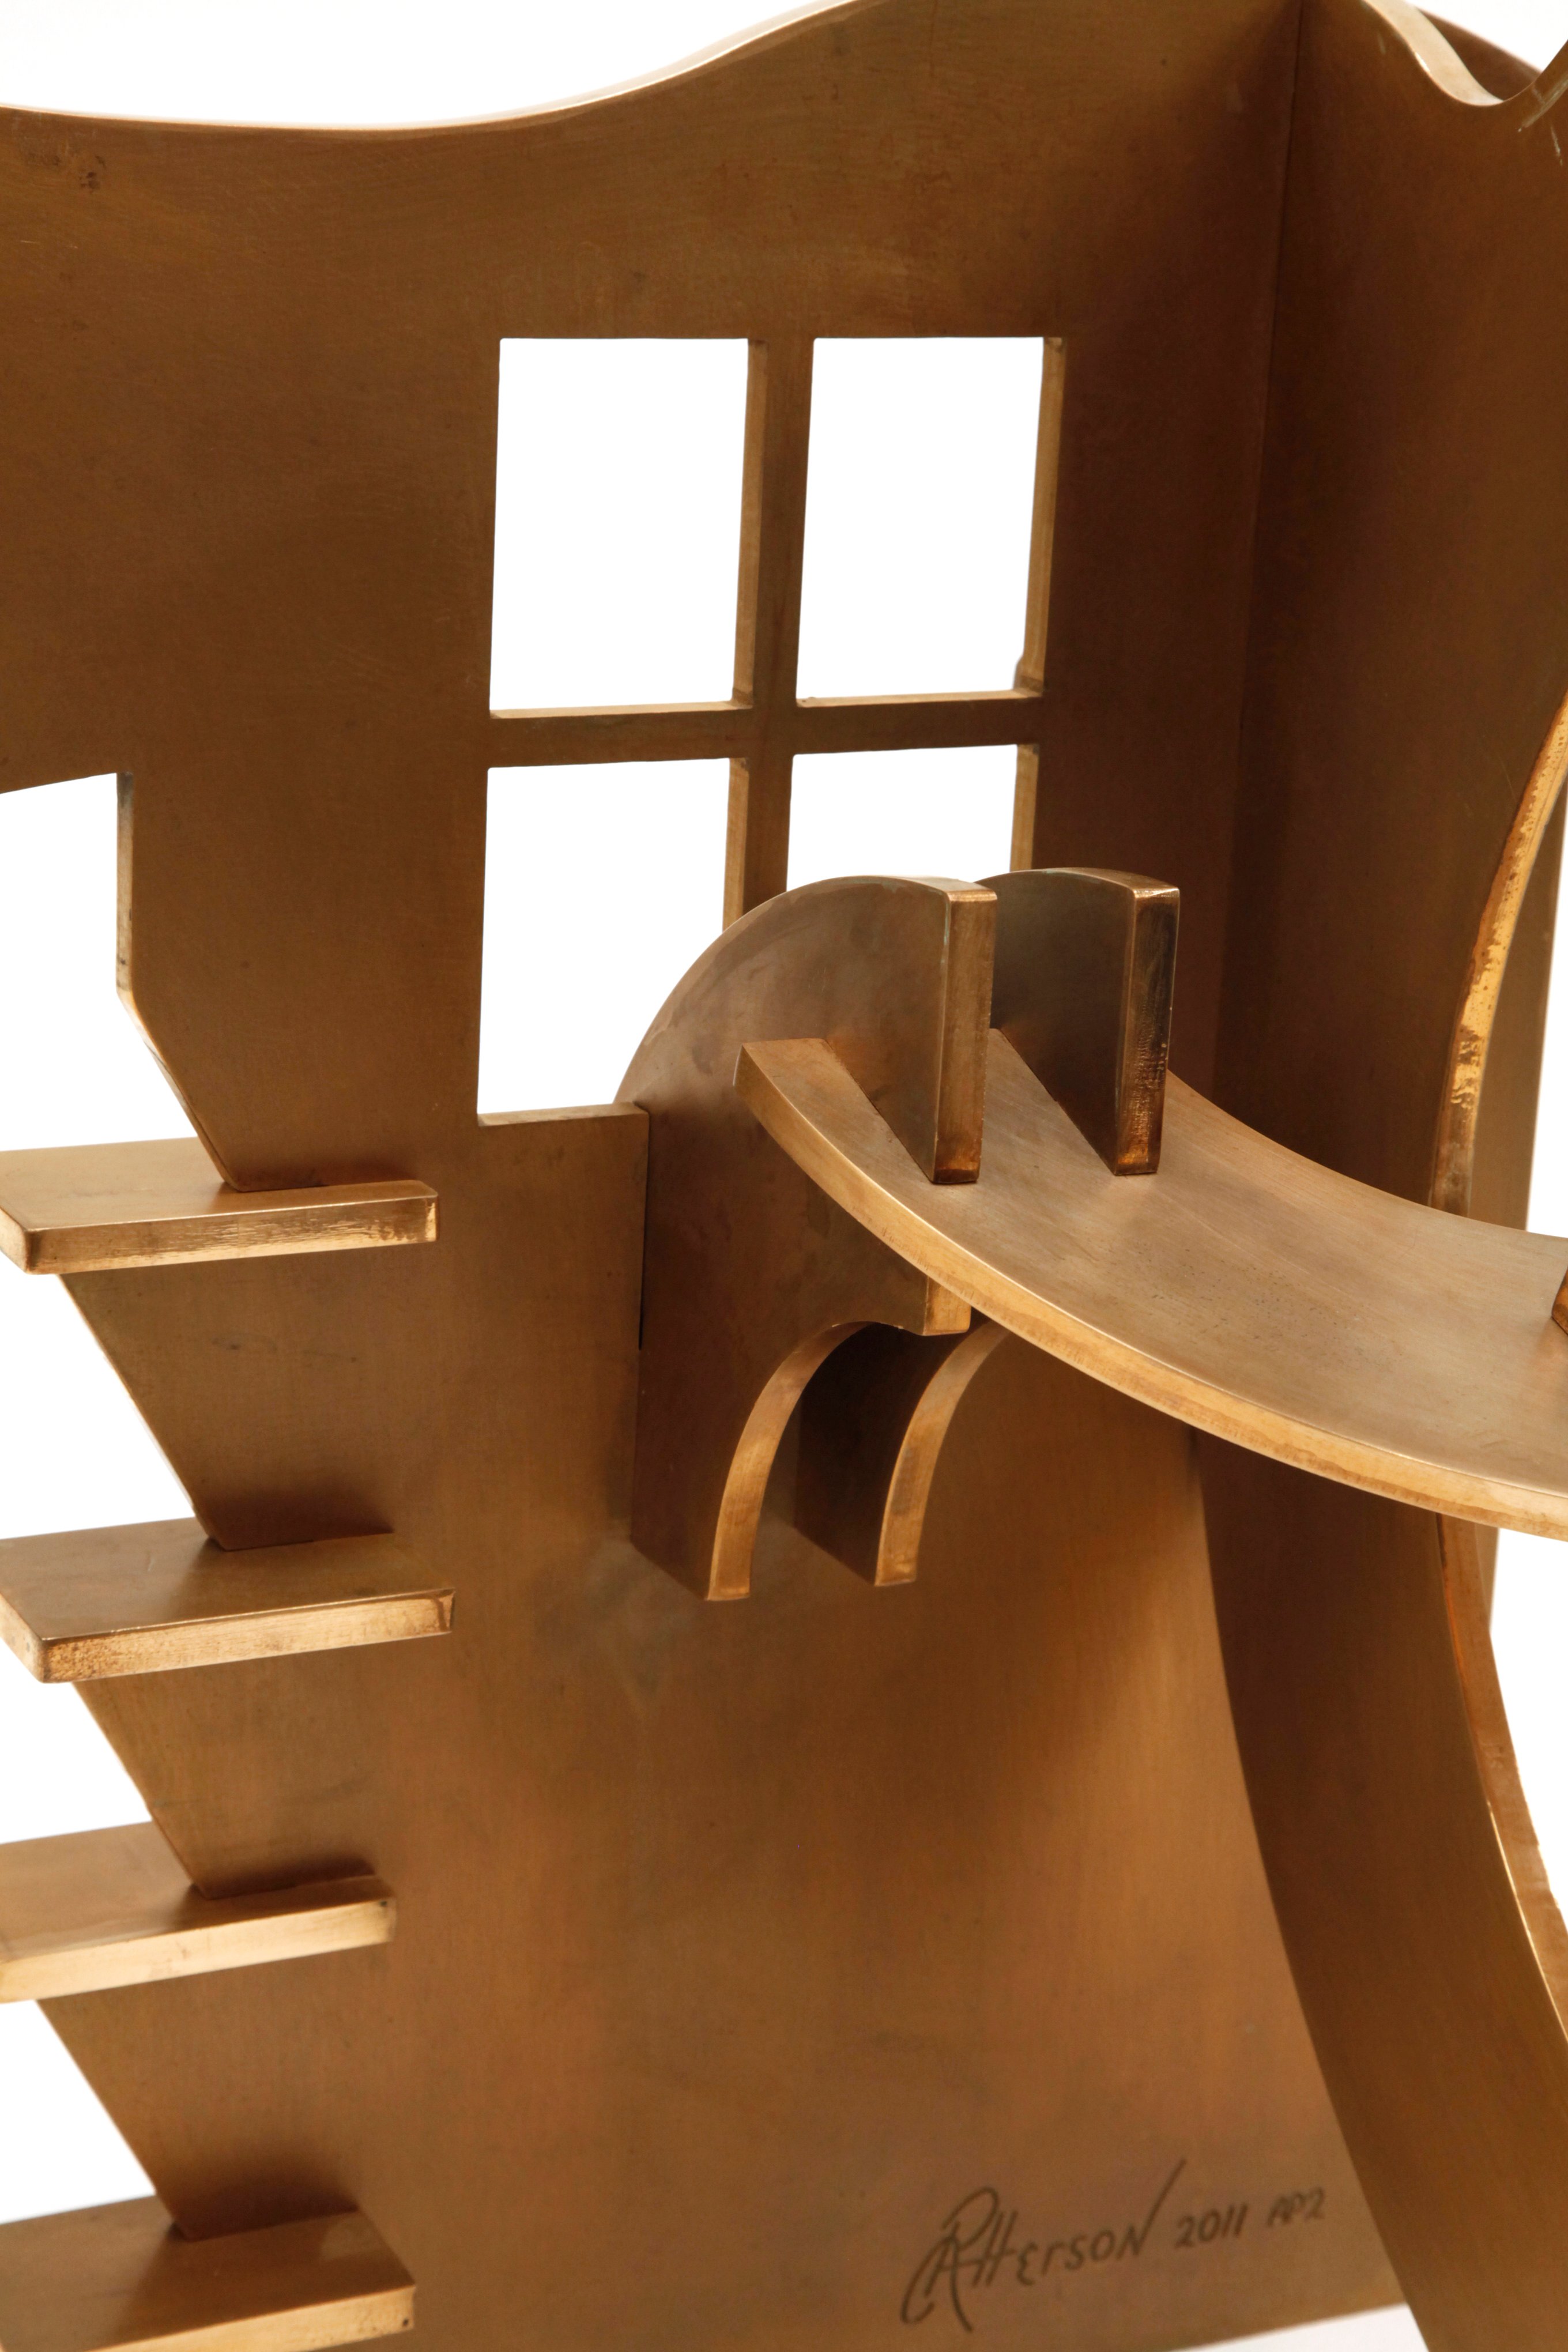 View From Shungo's Window (Detail) - 2011, Fabricated Bronze with Patina, 35” x 31” x 27”
